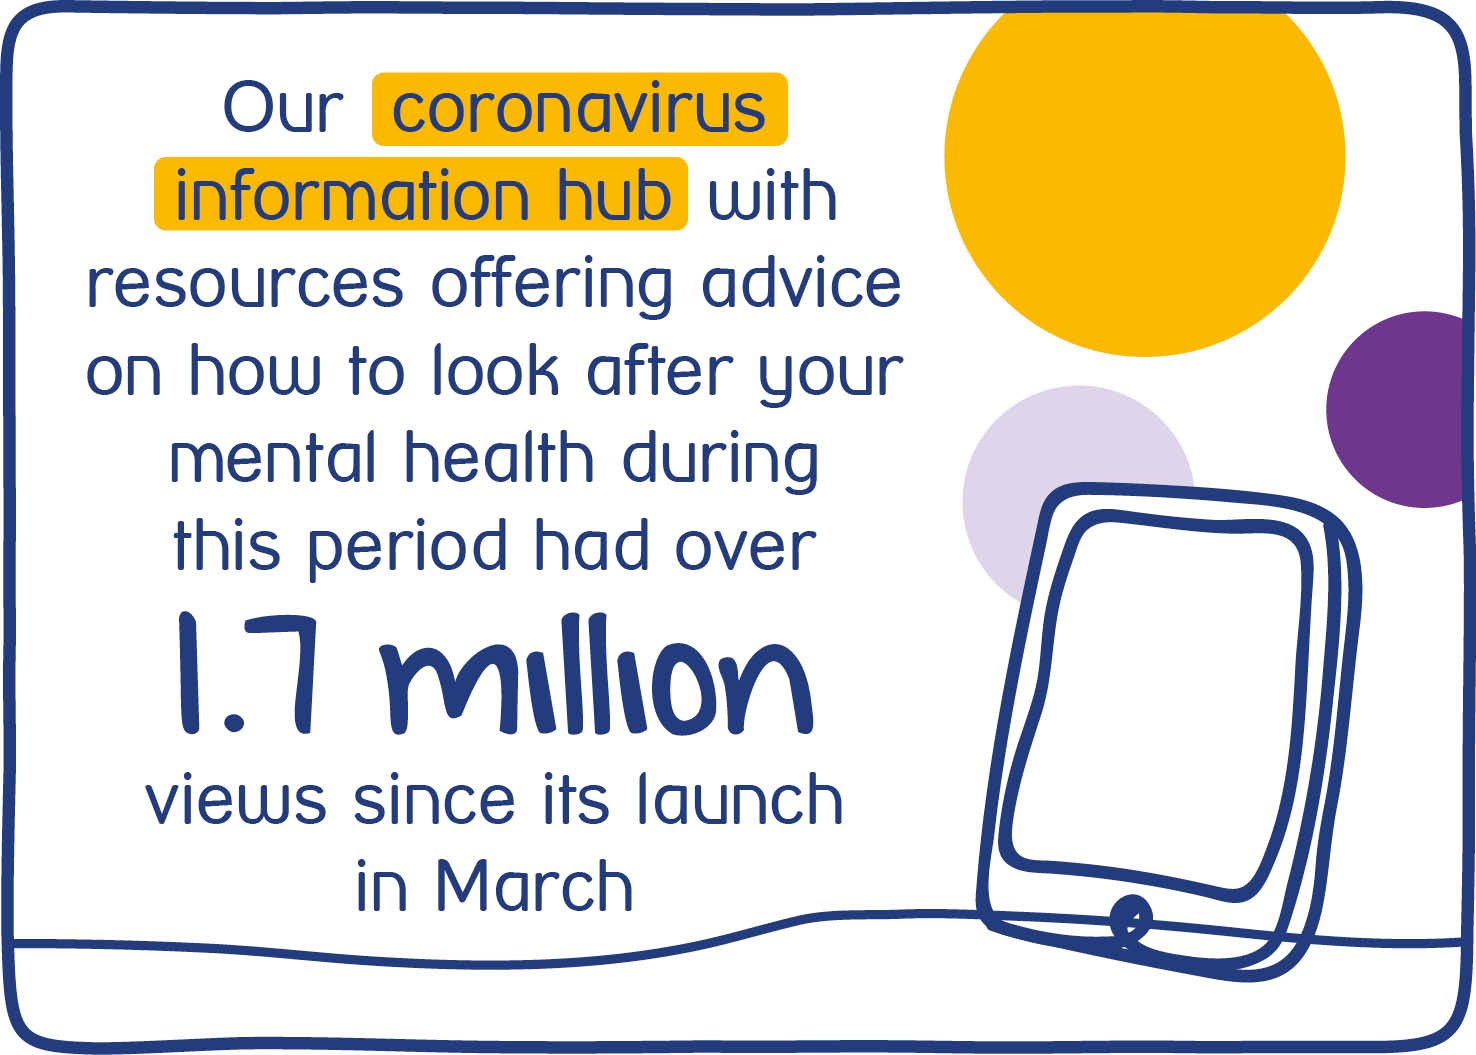 An infographic from Mind showing that 1.7 million people viewed its mental health resource hub since its launch in March 2020.